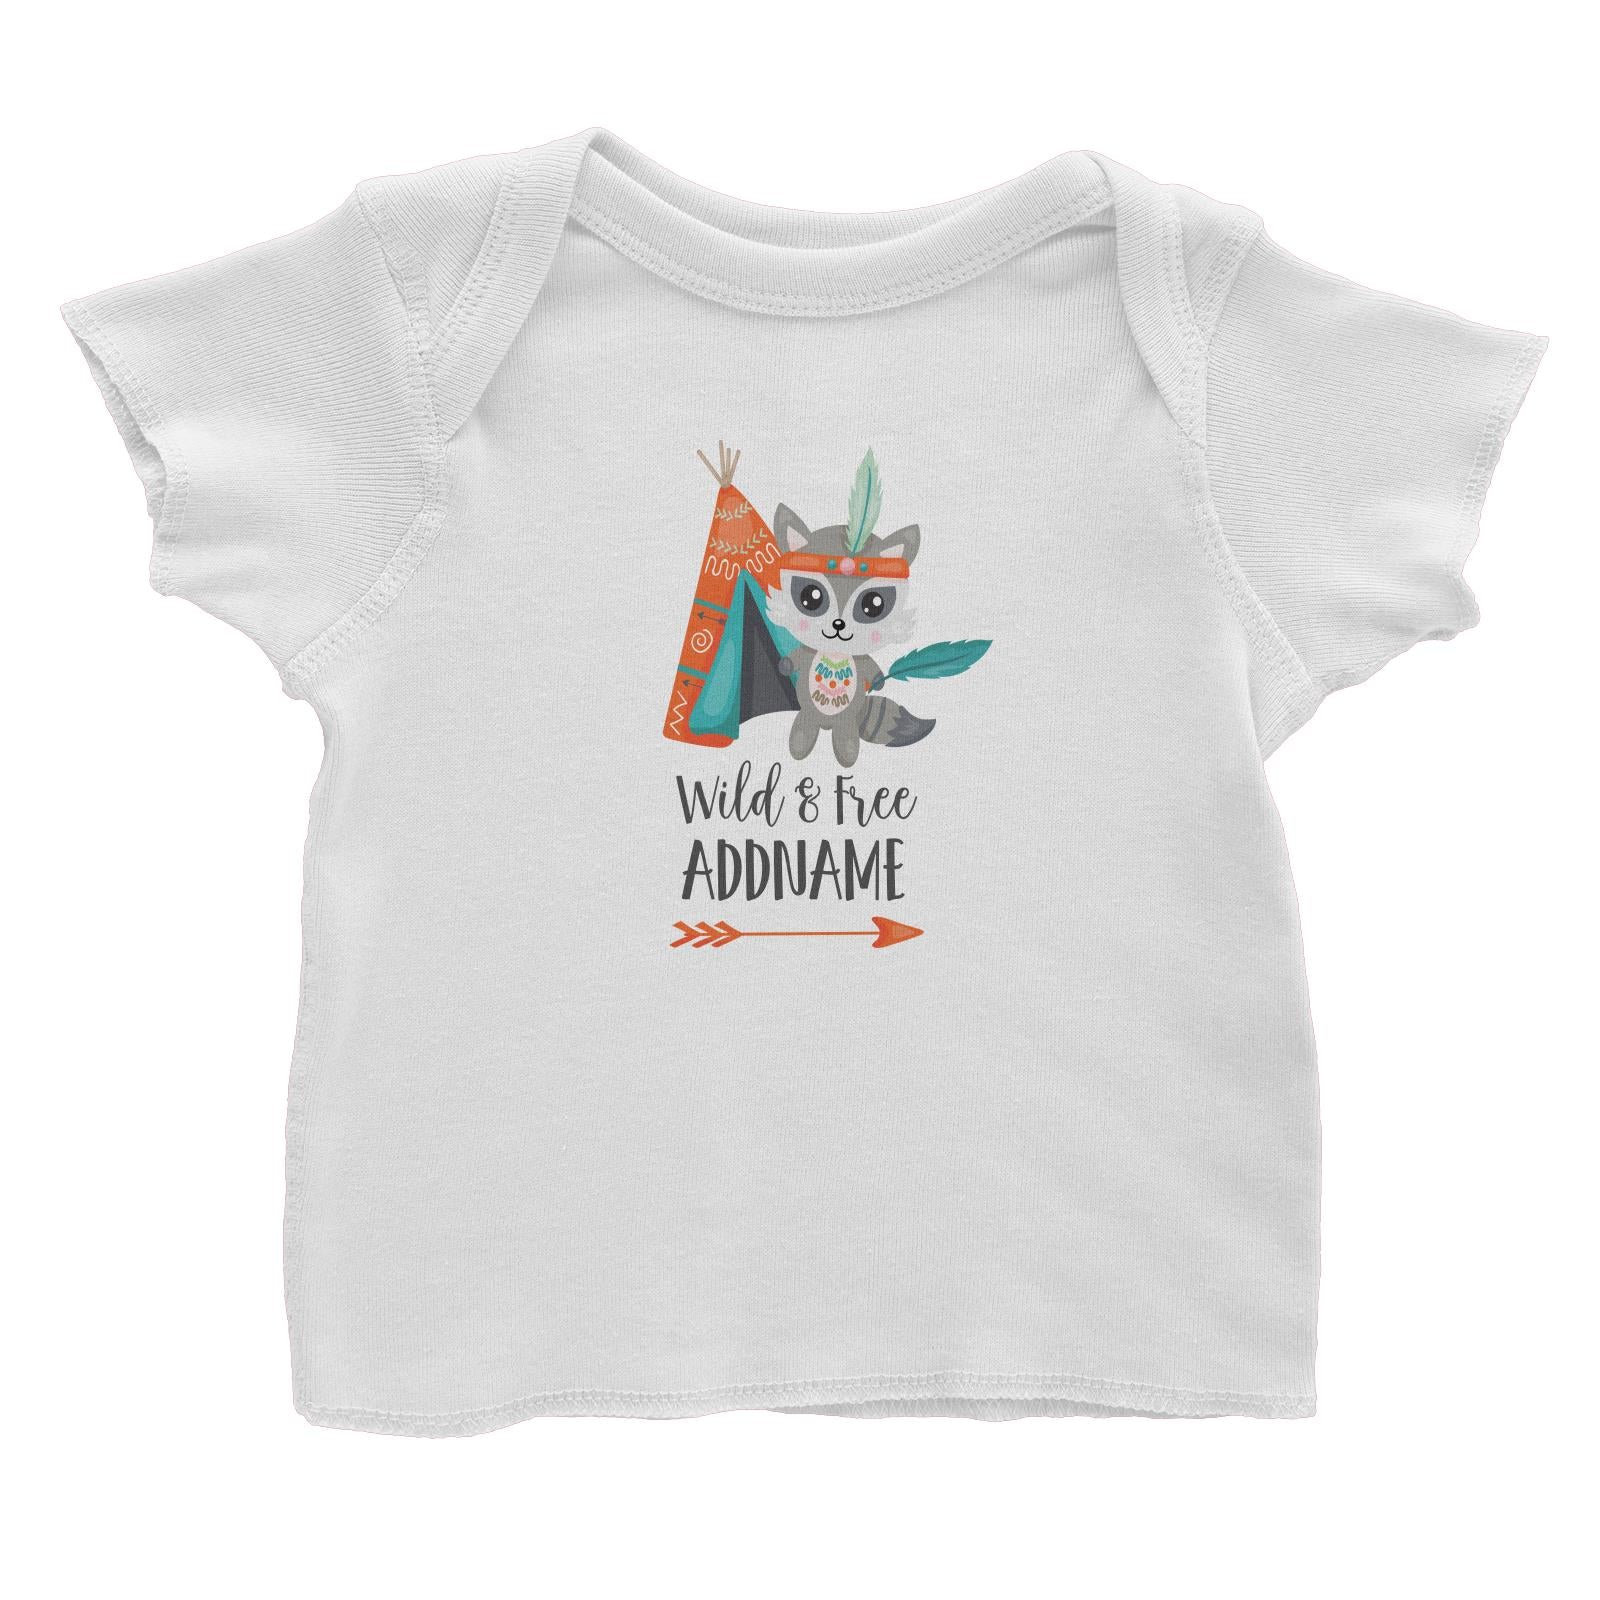 Cute Tribe Animals Raccoon Wild & Free Addname Baby T-Shirt